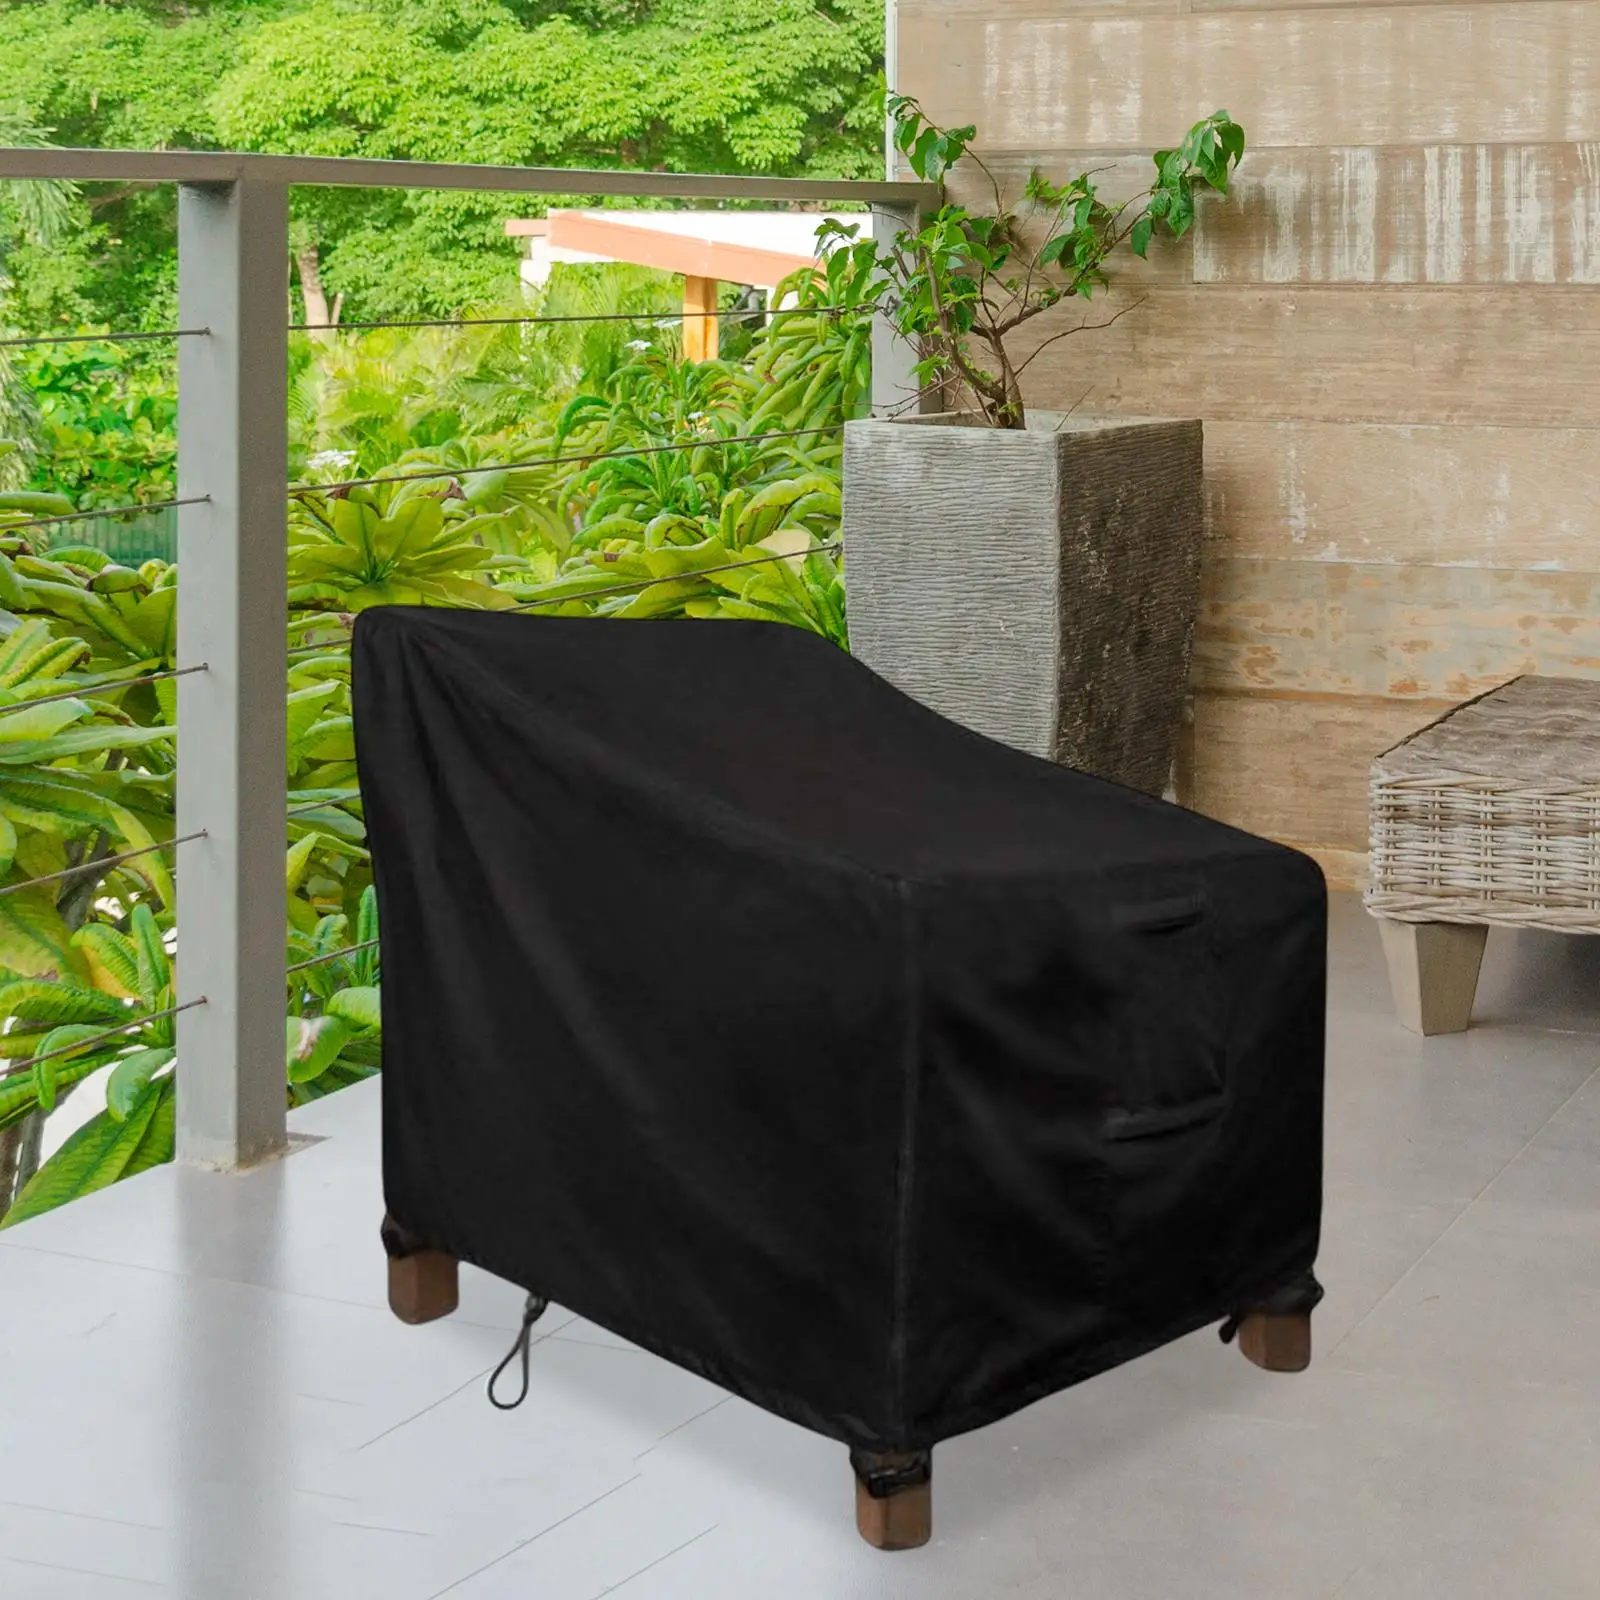 High Back Patio Chair Cover, Lounge Deep Seat Cover Heavy Duty Garden Furniture